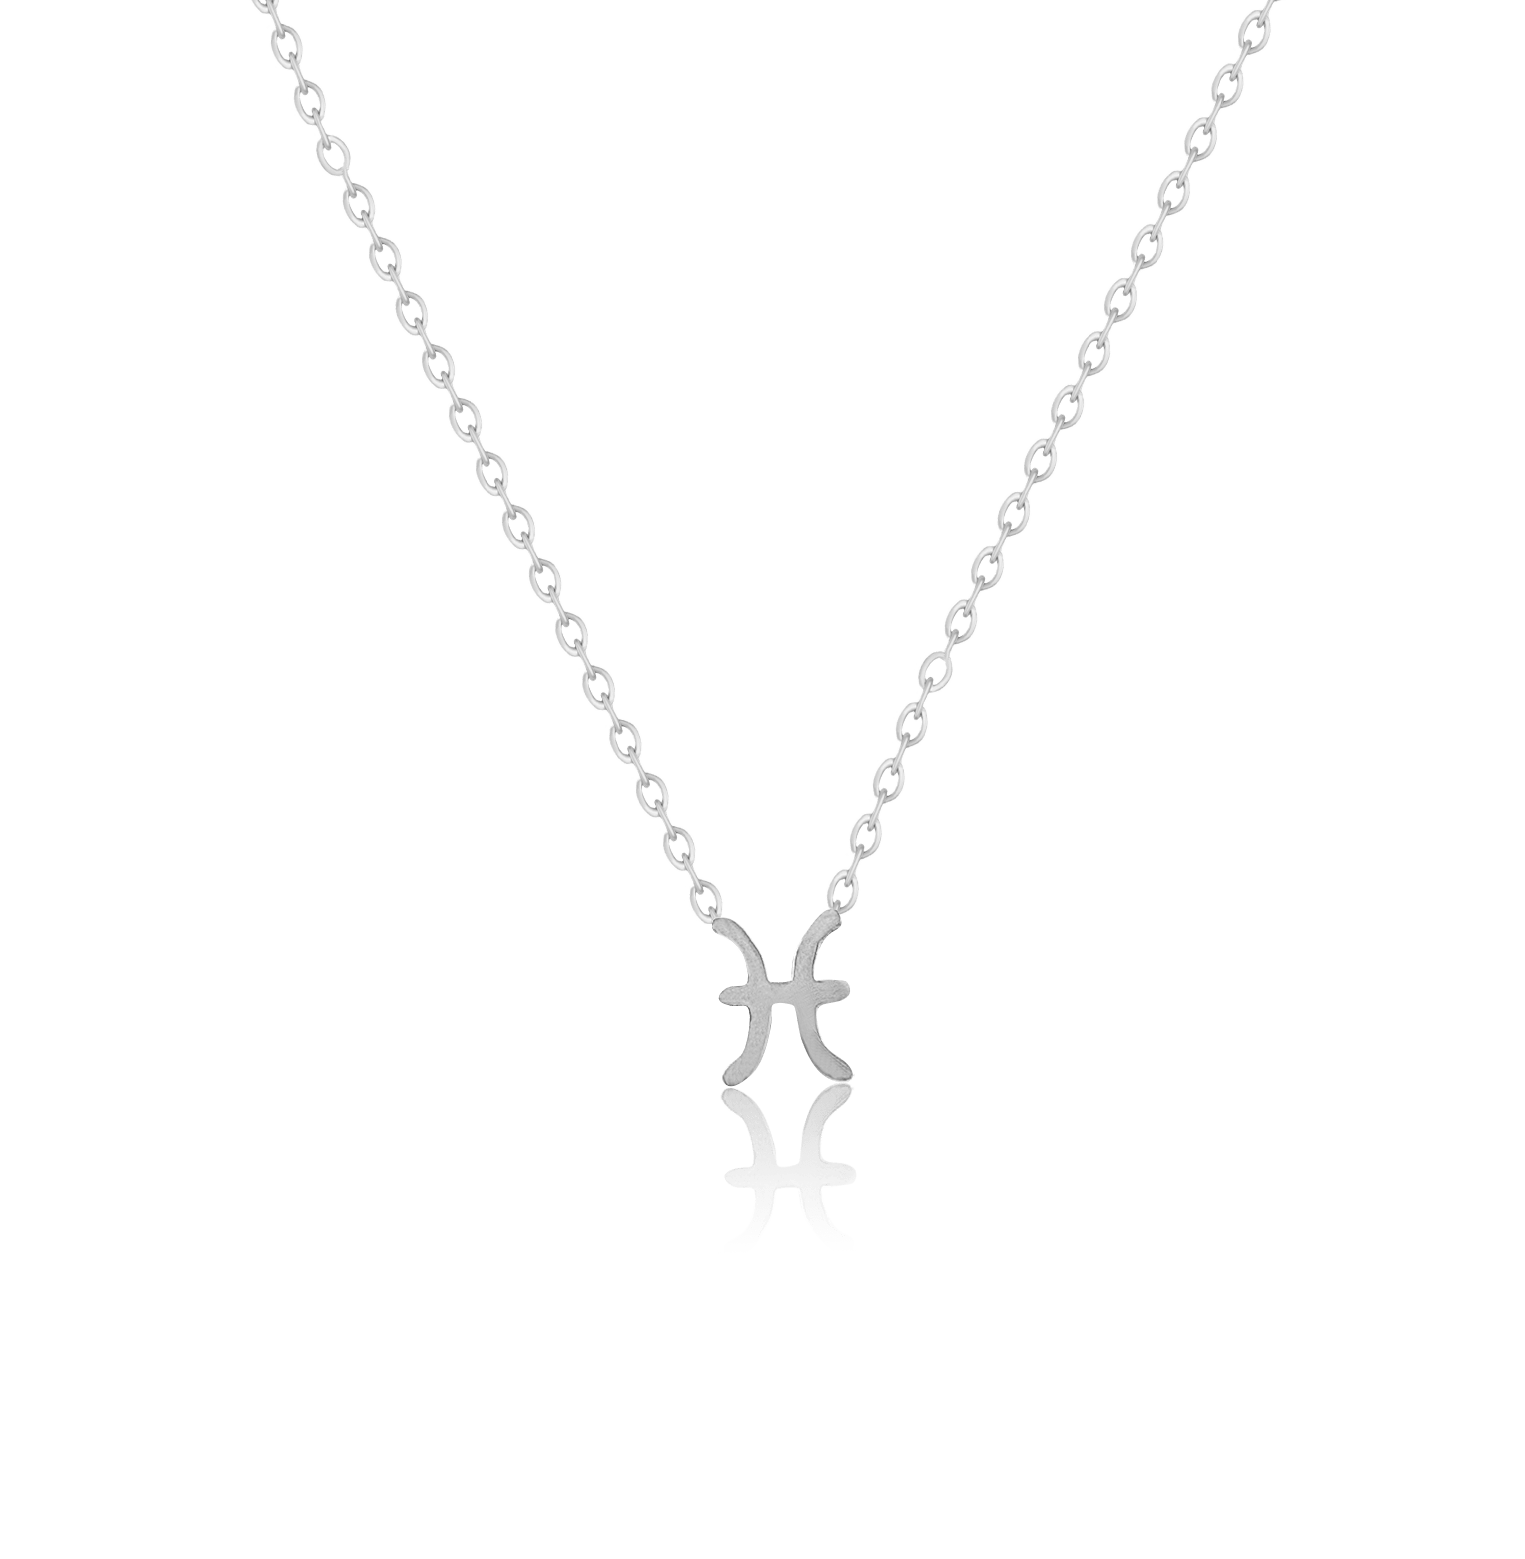 bianco rosso Necklaces Silver Pisces - Necklace cyprus greece jewelry gift free shipping europe worldwide